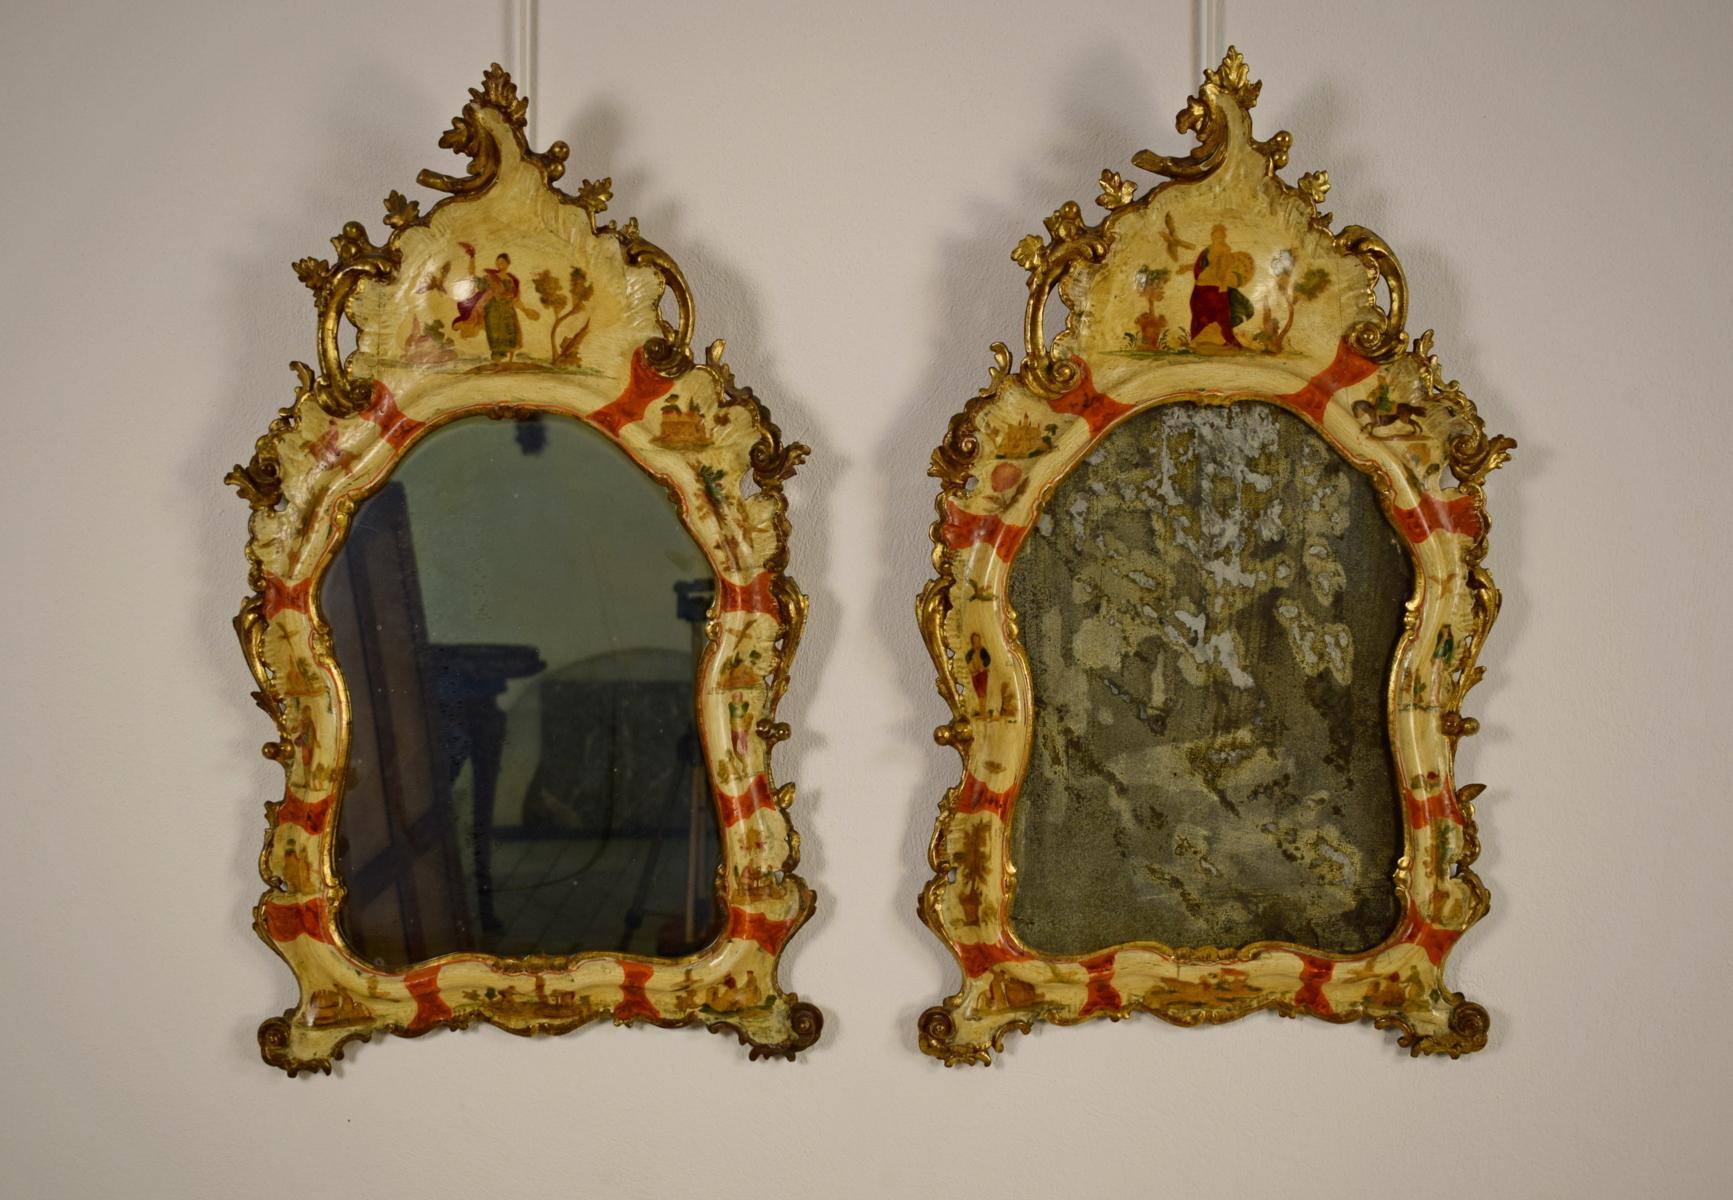 20th Century, Venice Arte Povera Lacquered Wood, Pair of Wall Mirrors  6